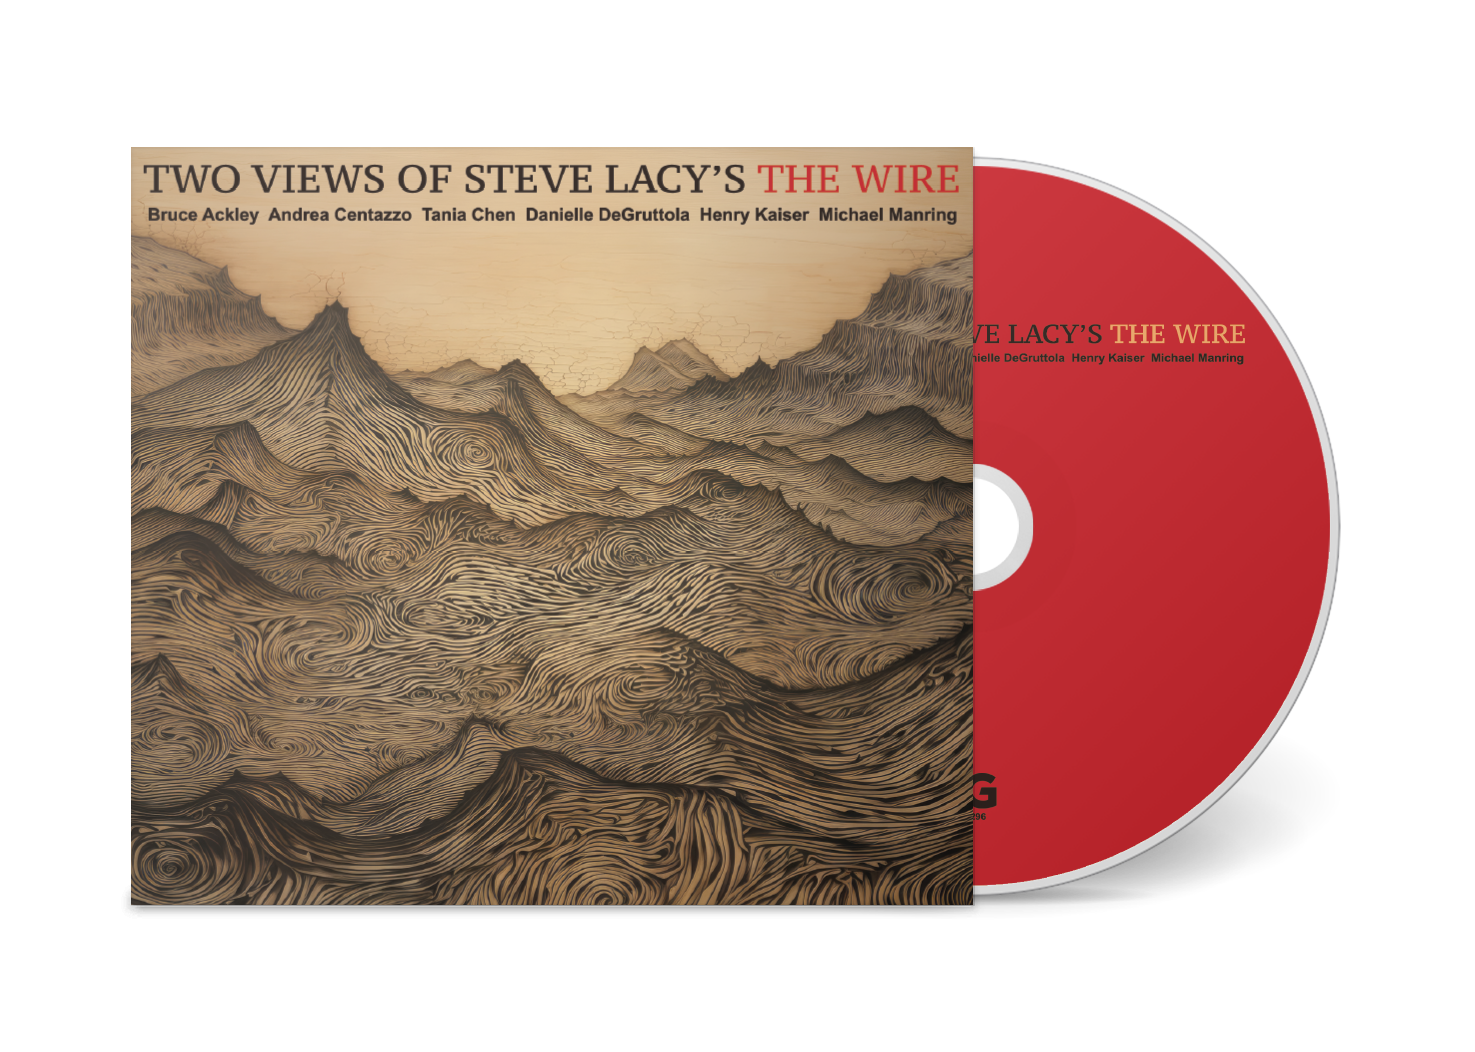 Ackley-Chen-Centazzo-DeGruttola-Kaiser-Manring "Two Views of Steve Lacy’s The Wire" CD